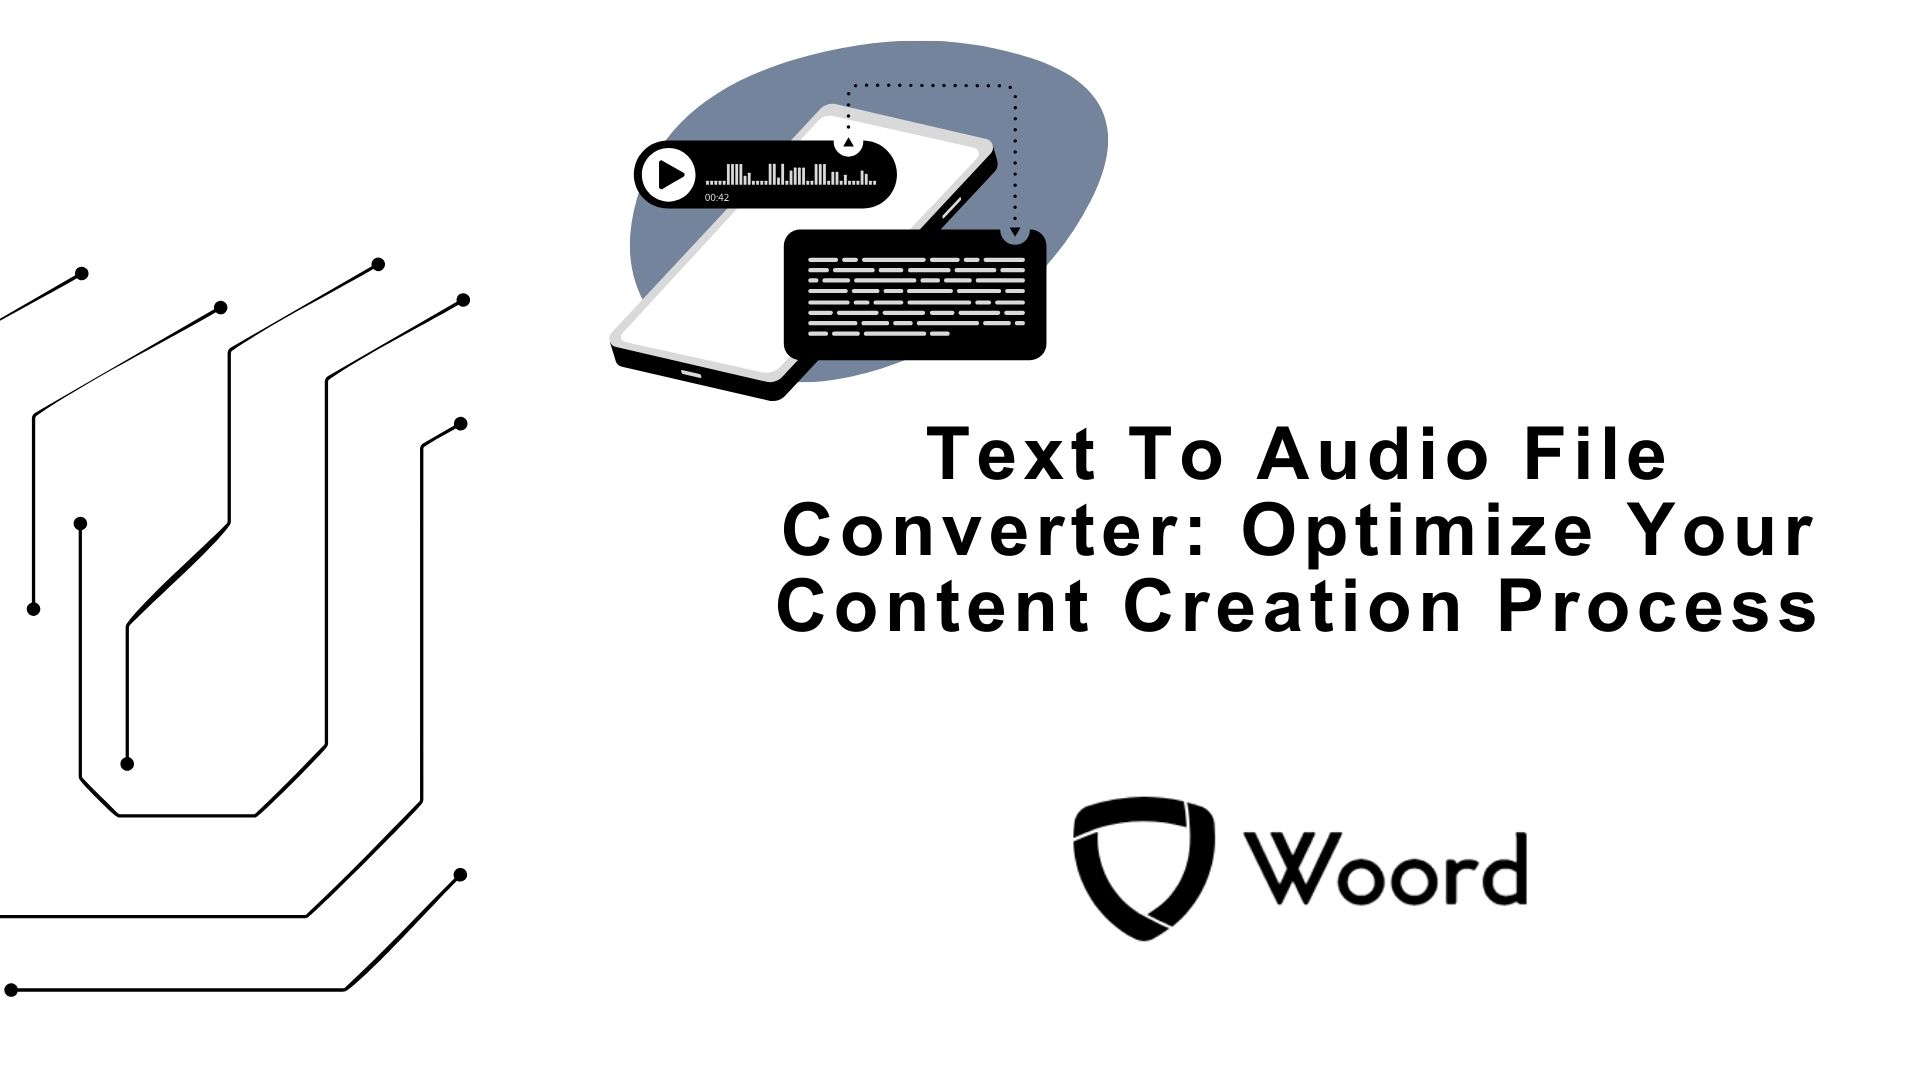 Text To Audio File Converter: Optimize Your Content Creation Process